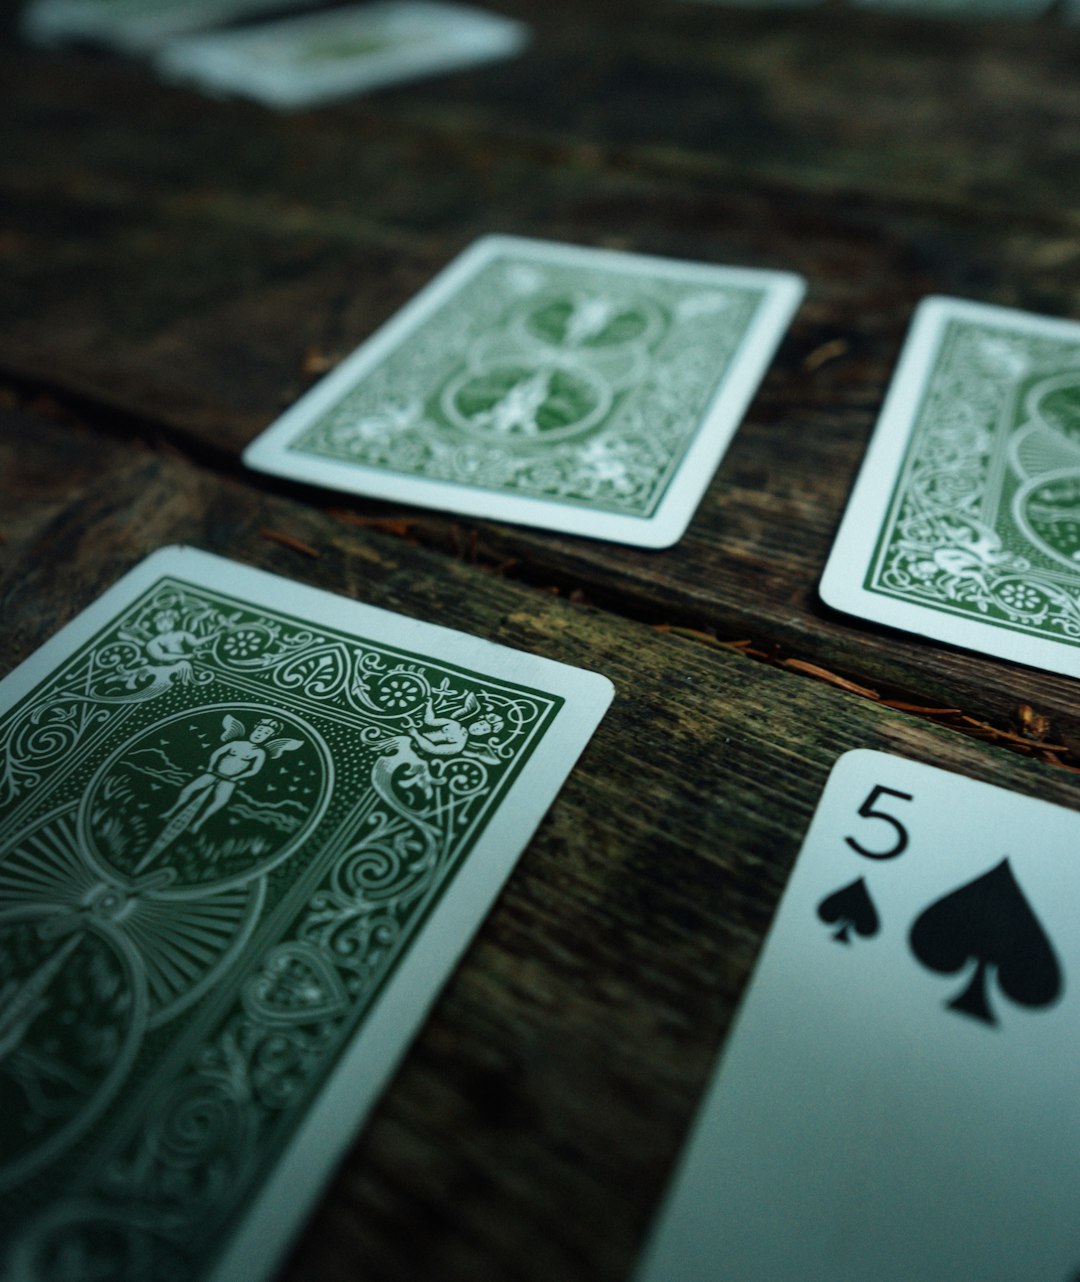 5 of spades playing opened on brown wooden surface